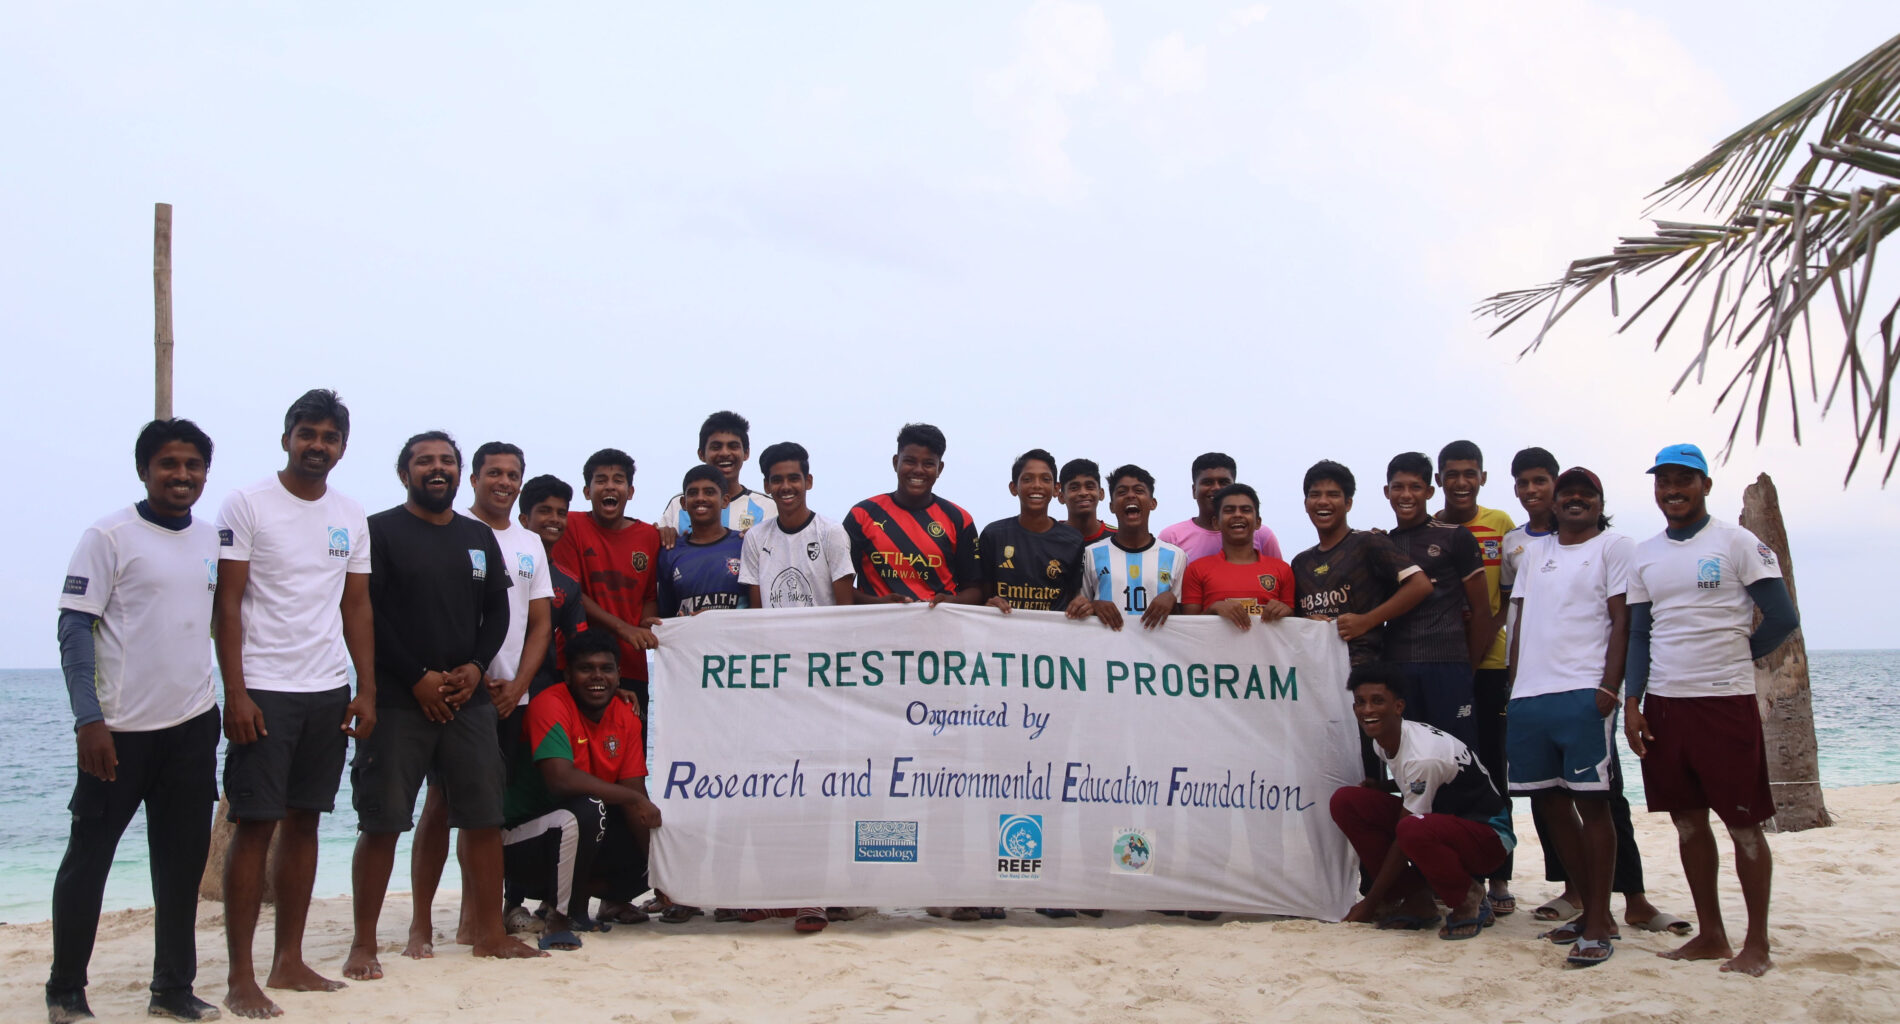 Group of people on beach with Reef Restoration Program banner